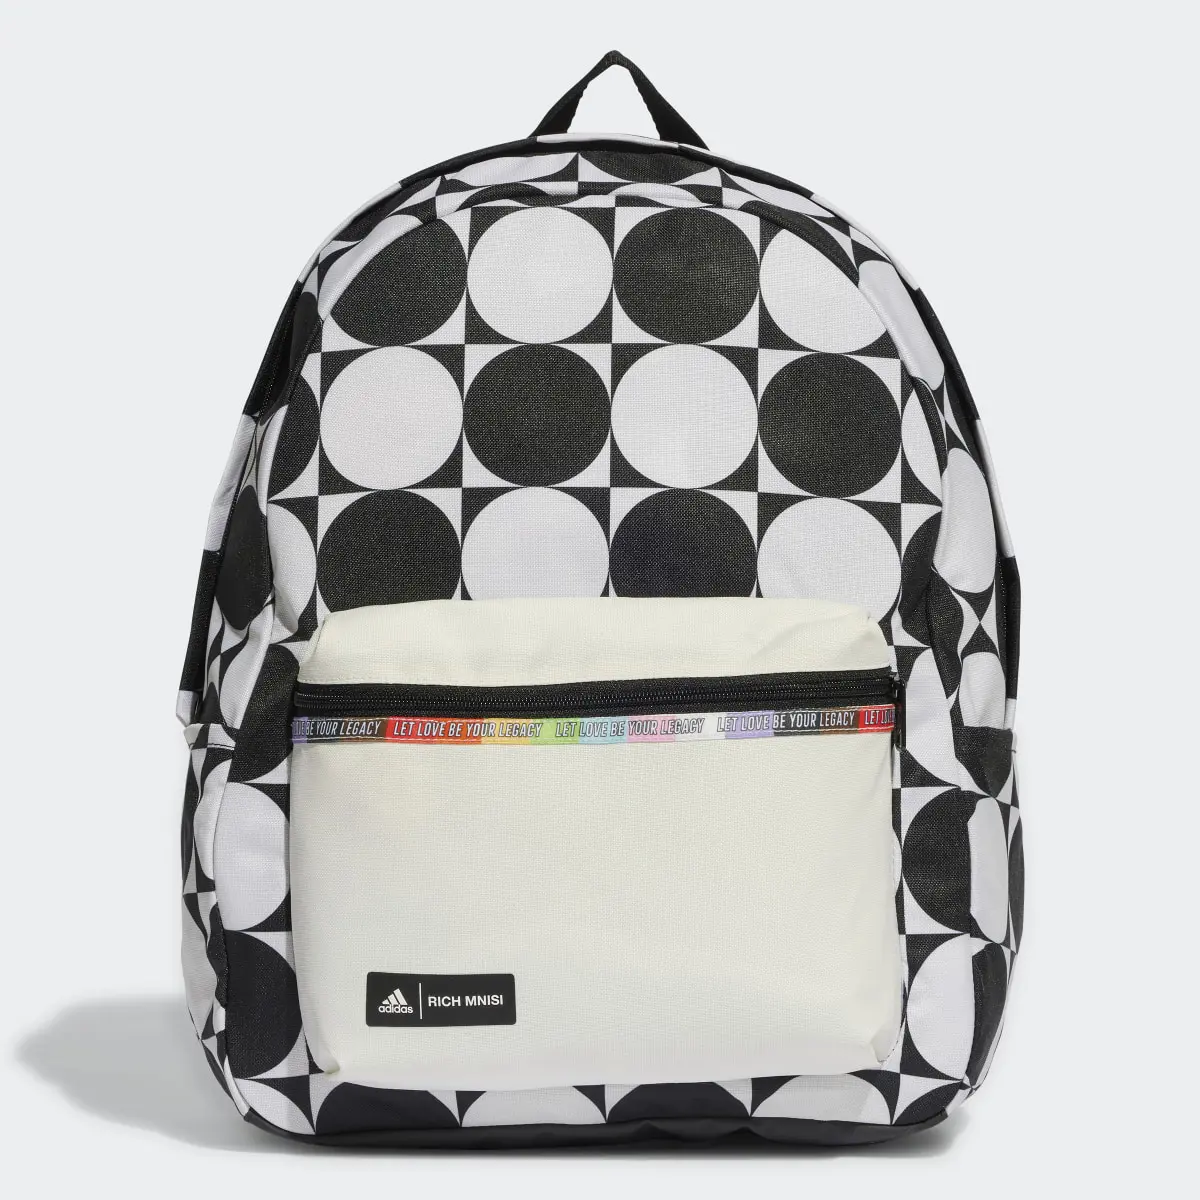 Adidas Classic Pride Backpack. 2